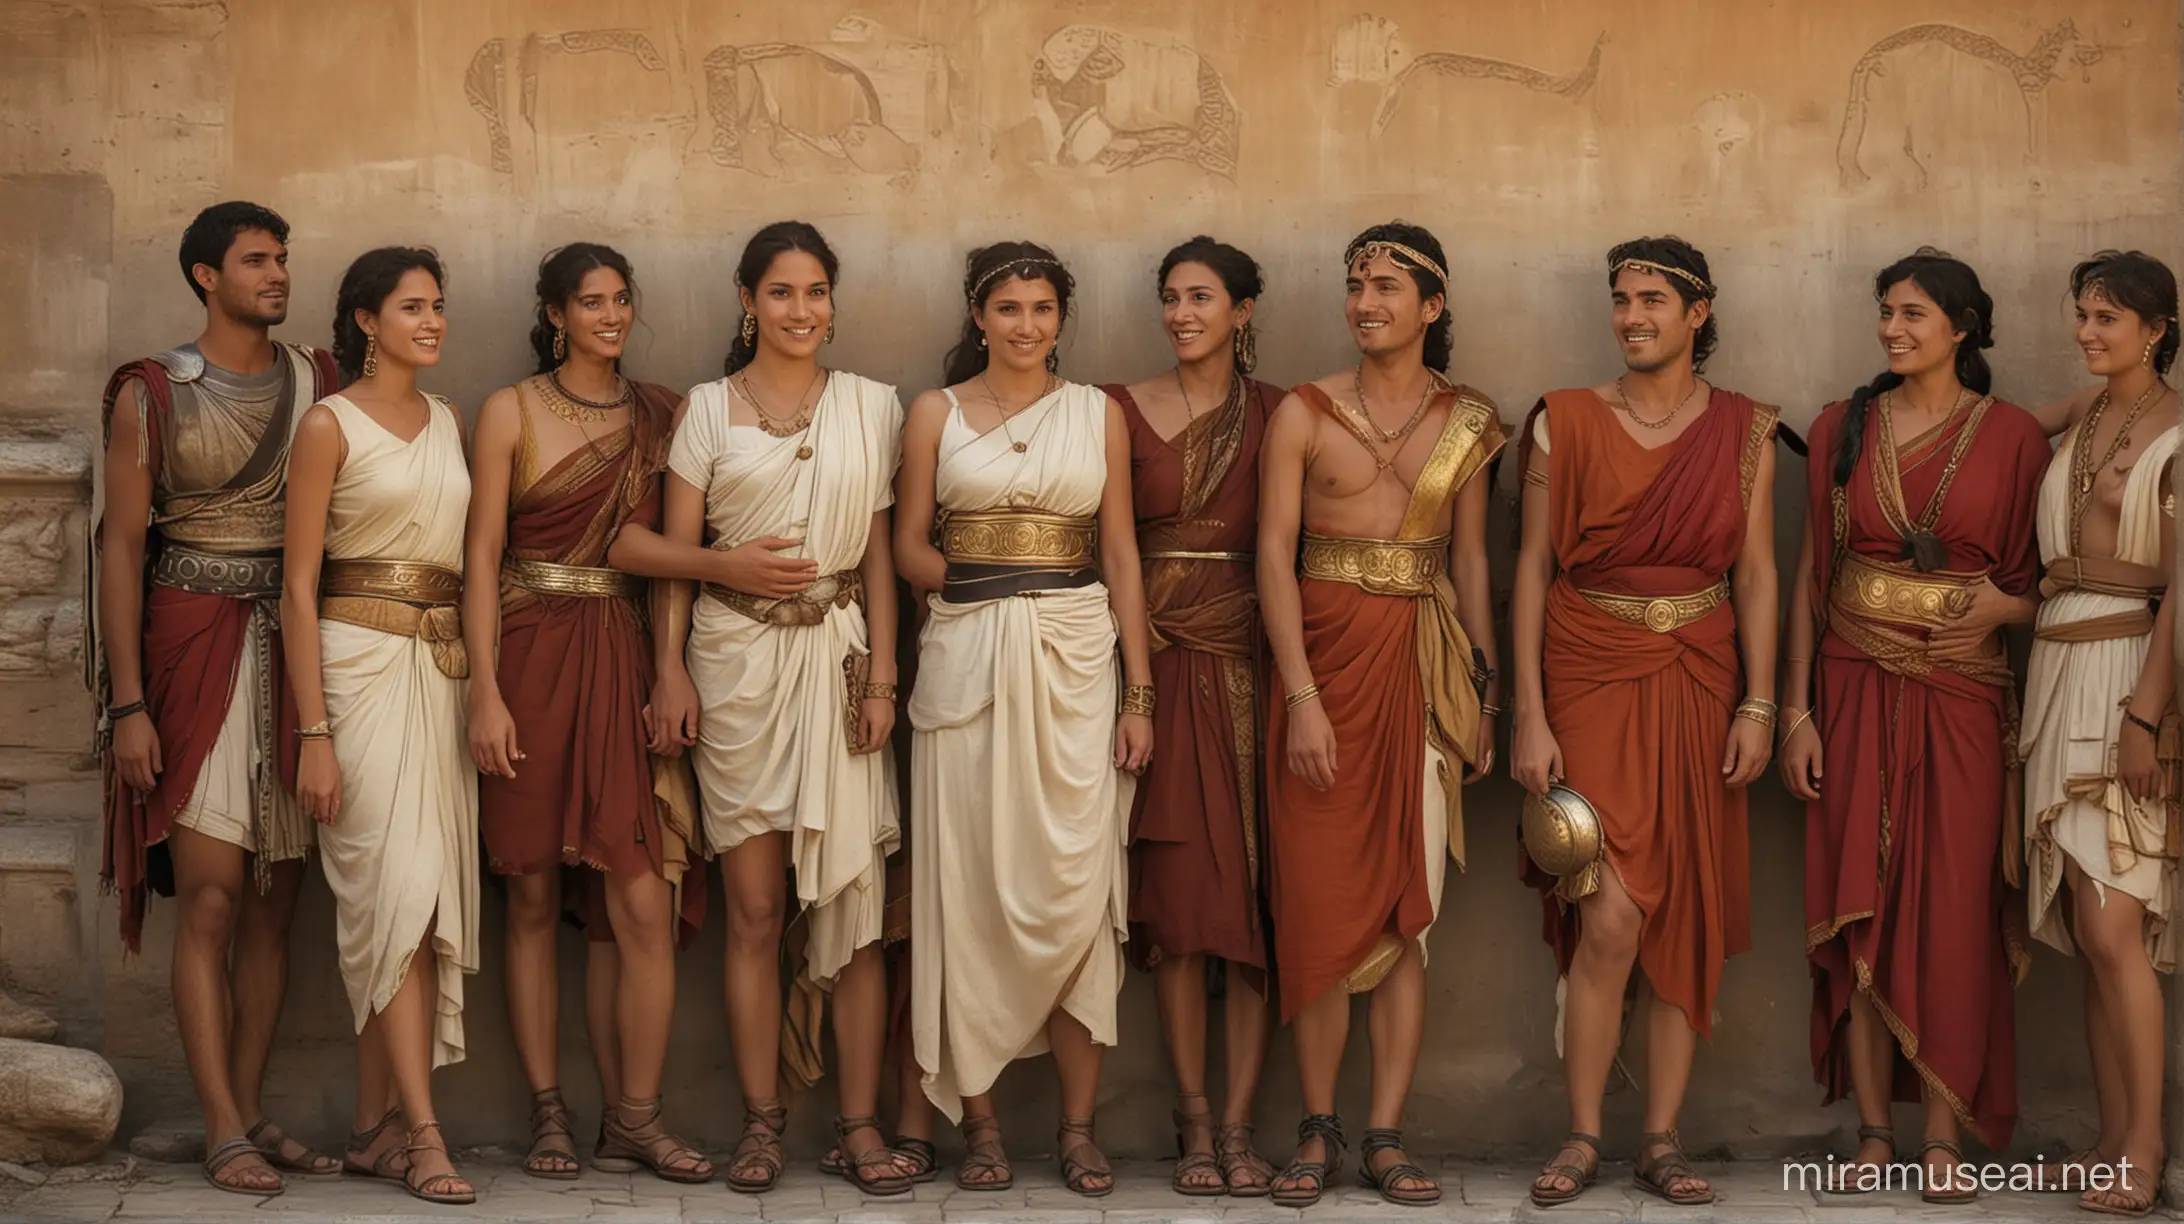 Diverse Community Living Together in Ancient Rome